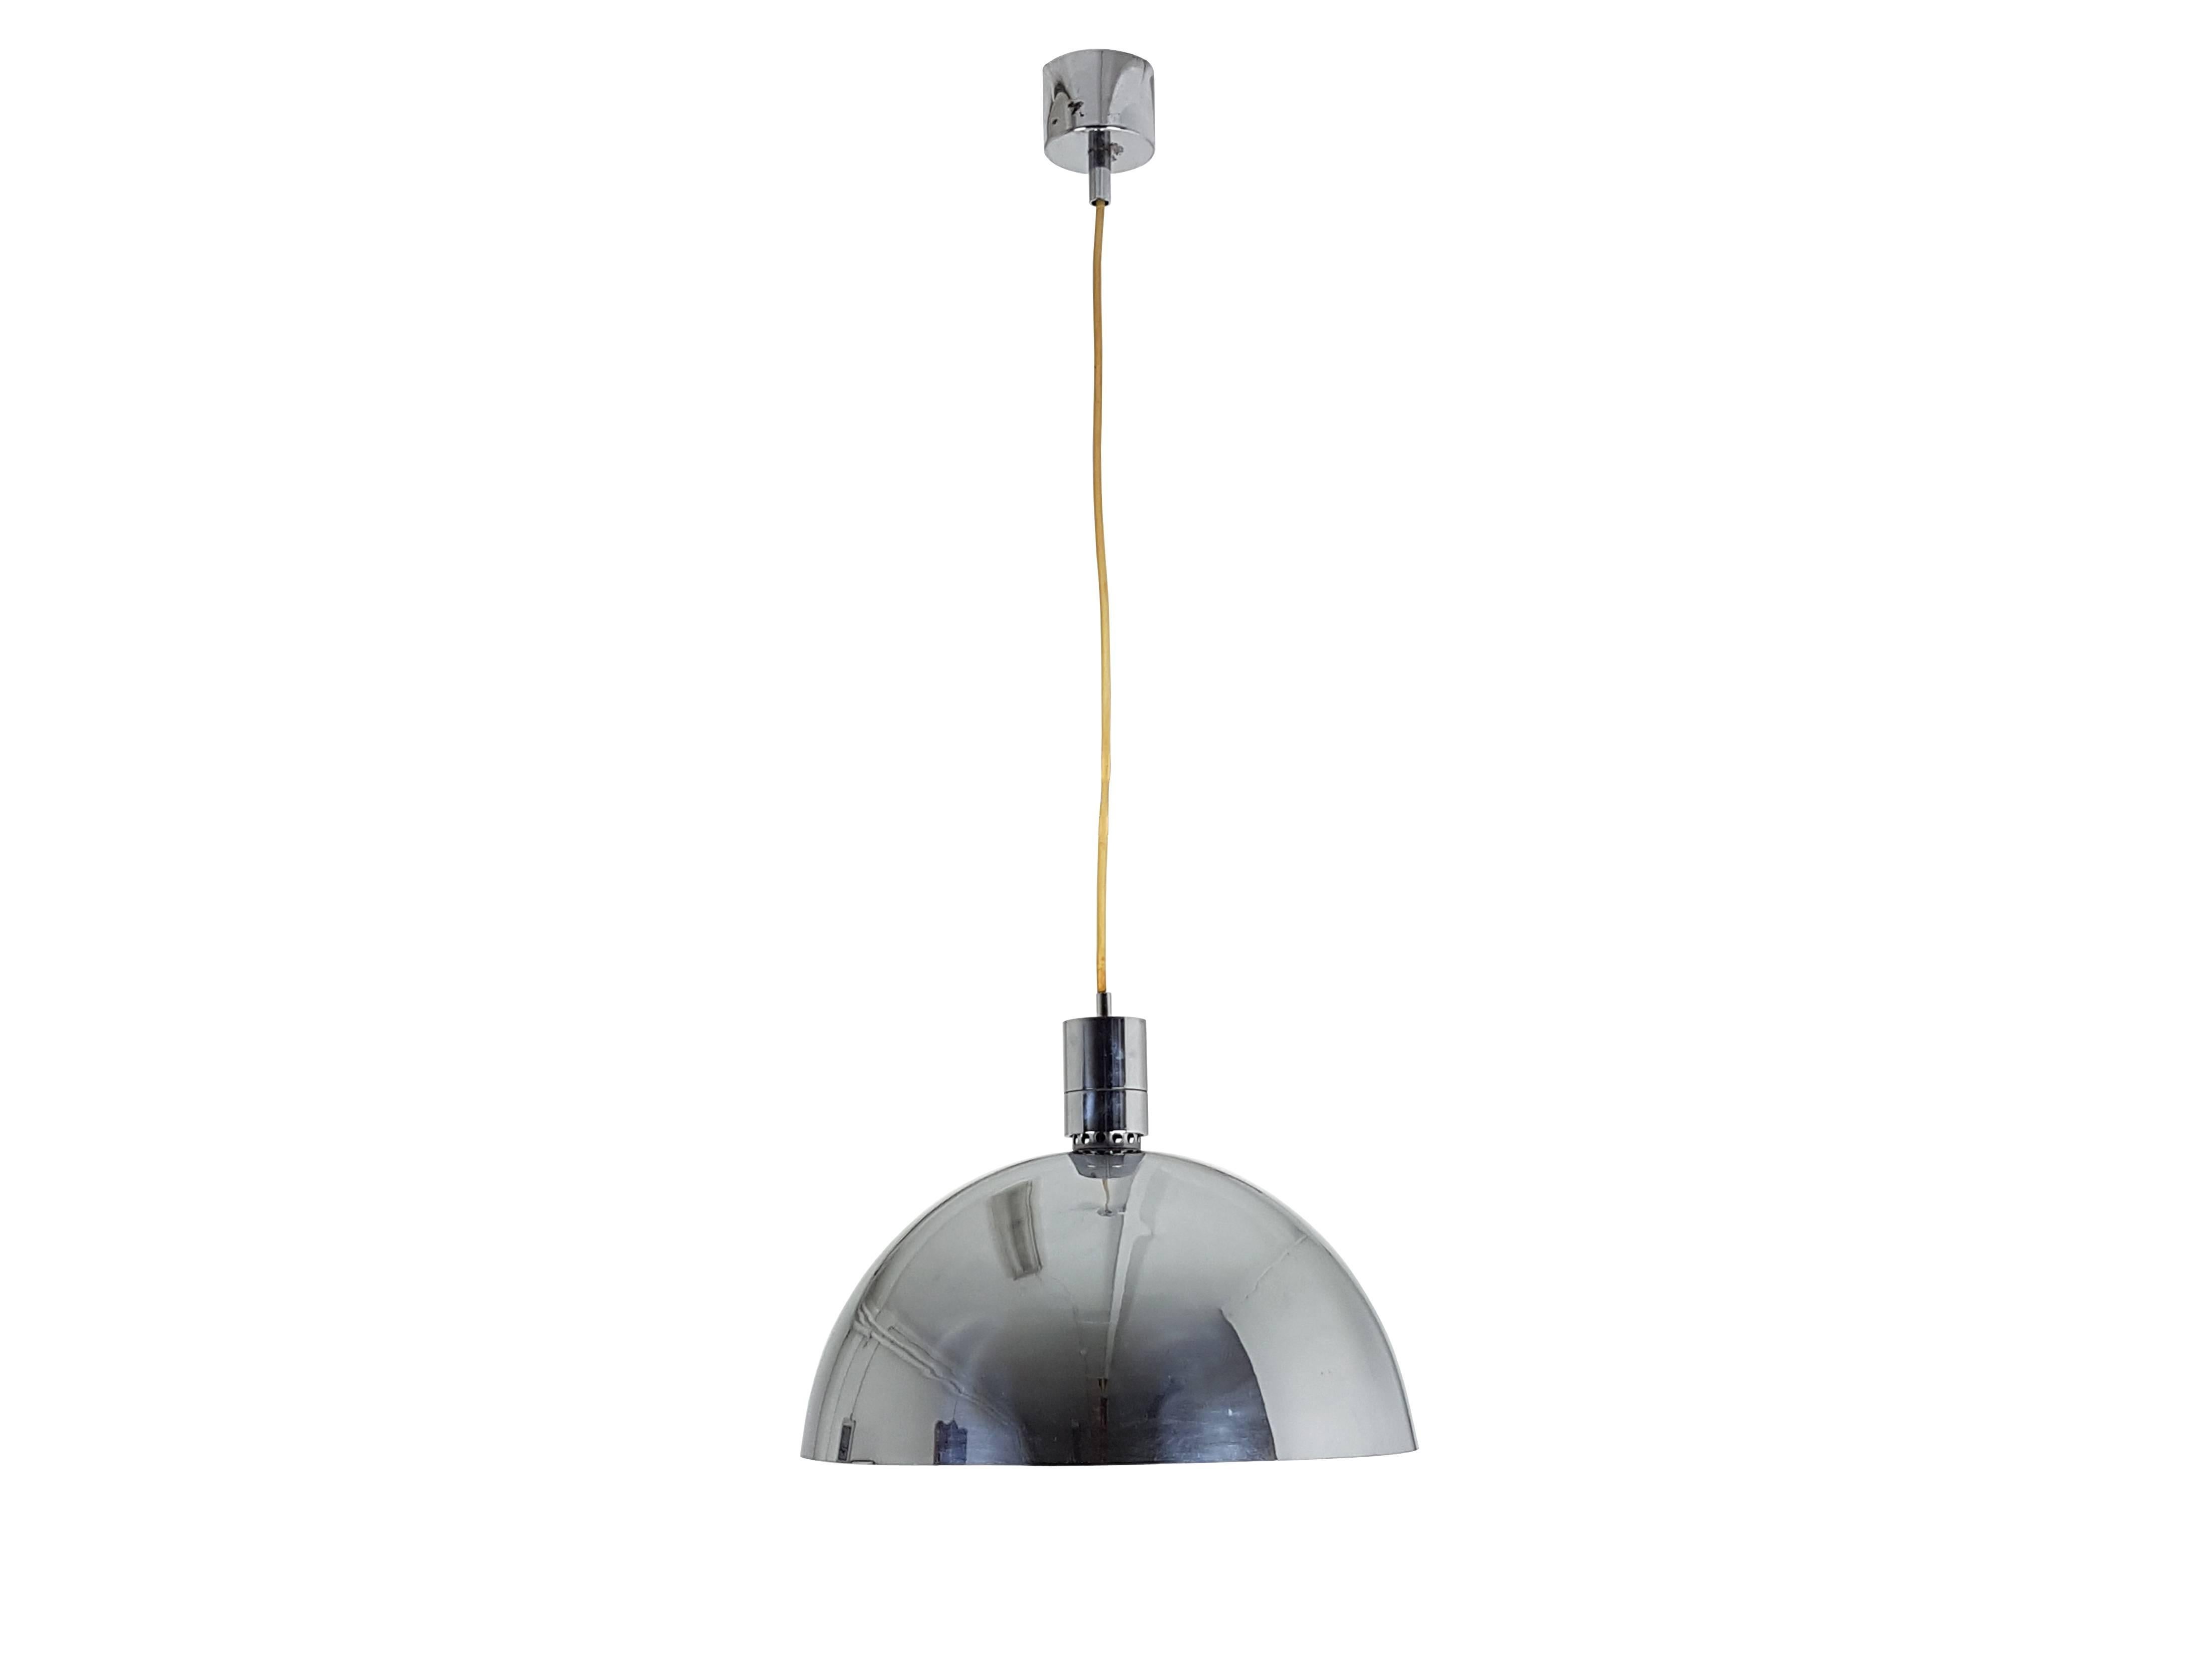 This pendant light model AM4Z was designed in Italy by Franco Albini and Franca Helg for Sirrah in 1969. It belongs to the early original production. The pendant is made of chromed-plated and painted metal and it remains in overall good vintage